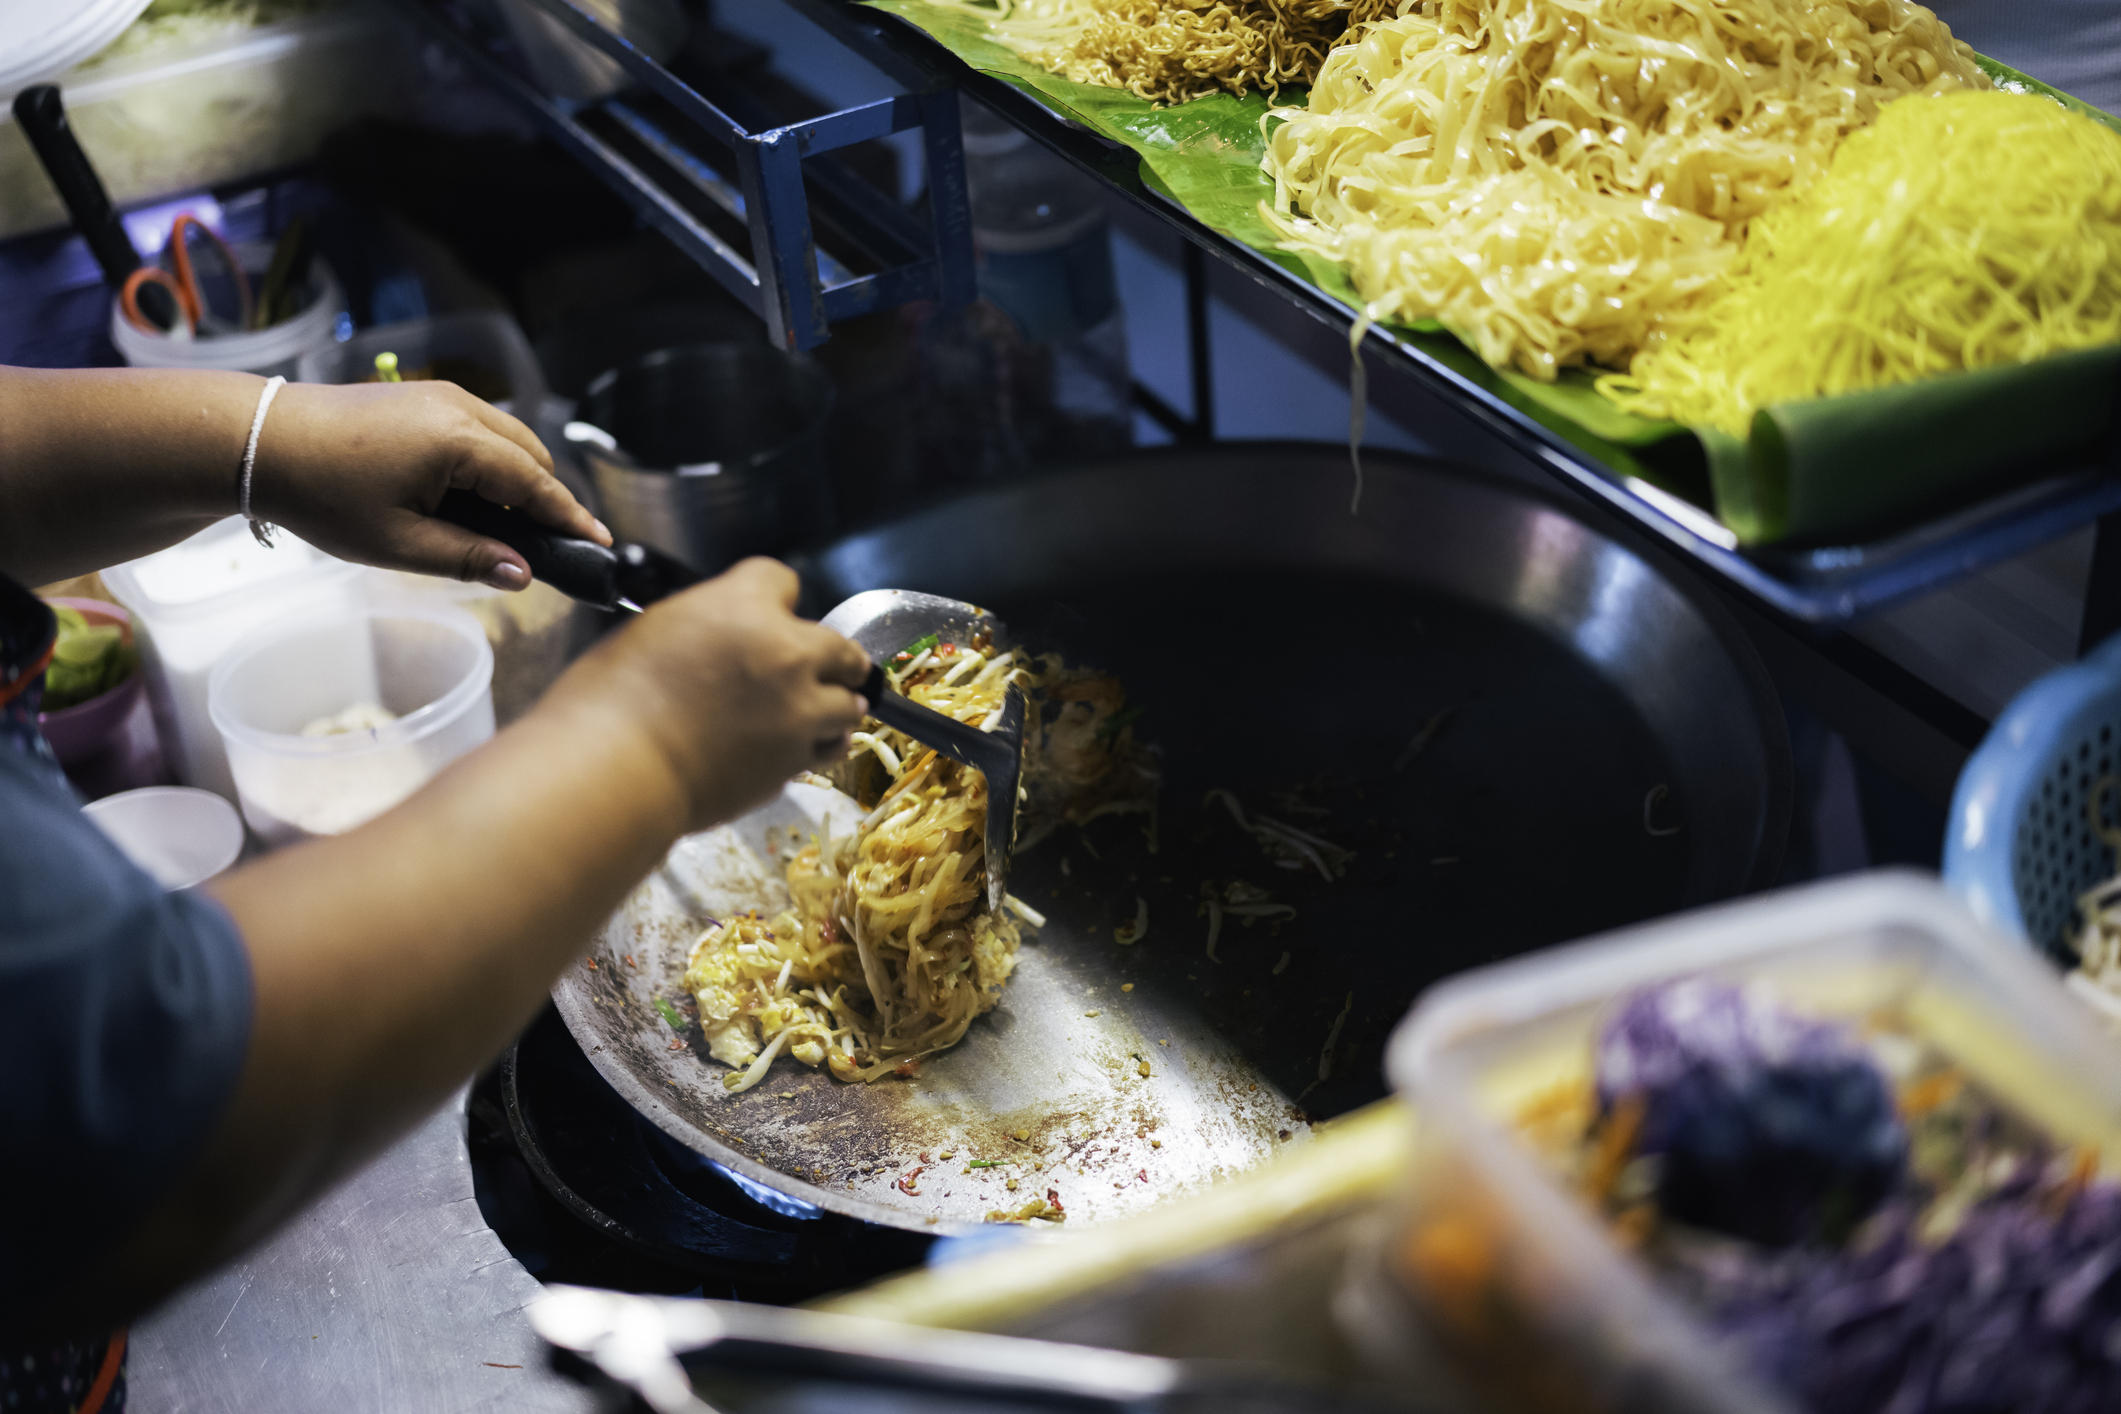 Person cooking noodles on a stove at a street market stall